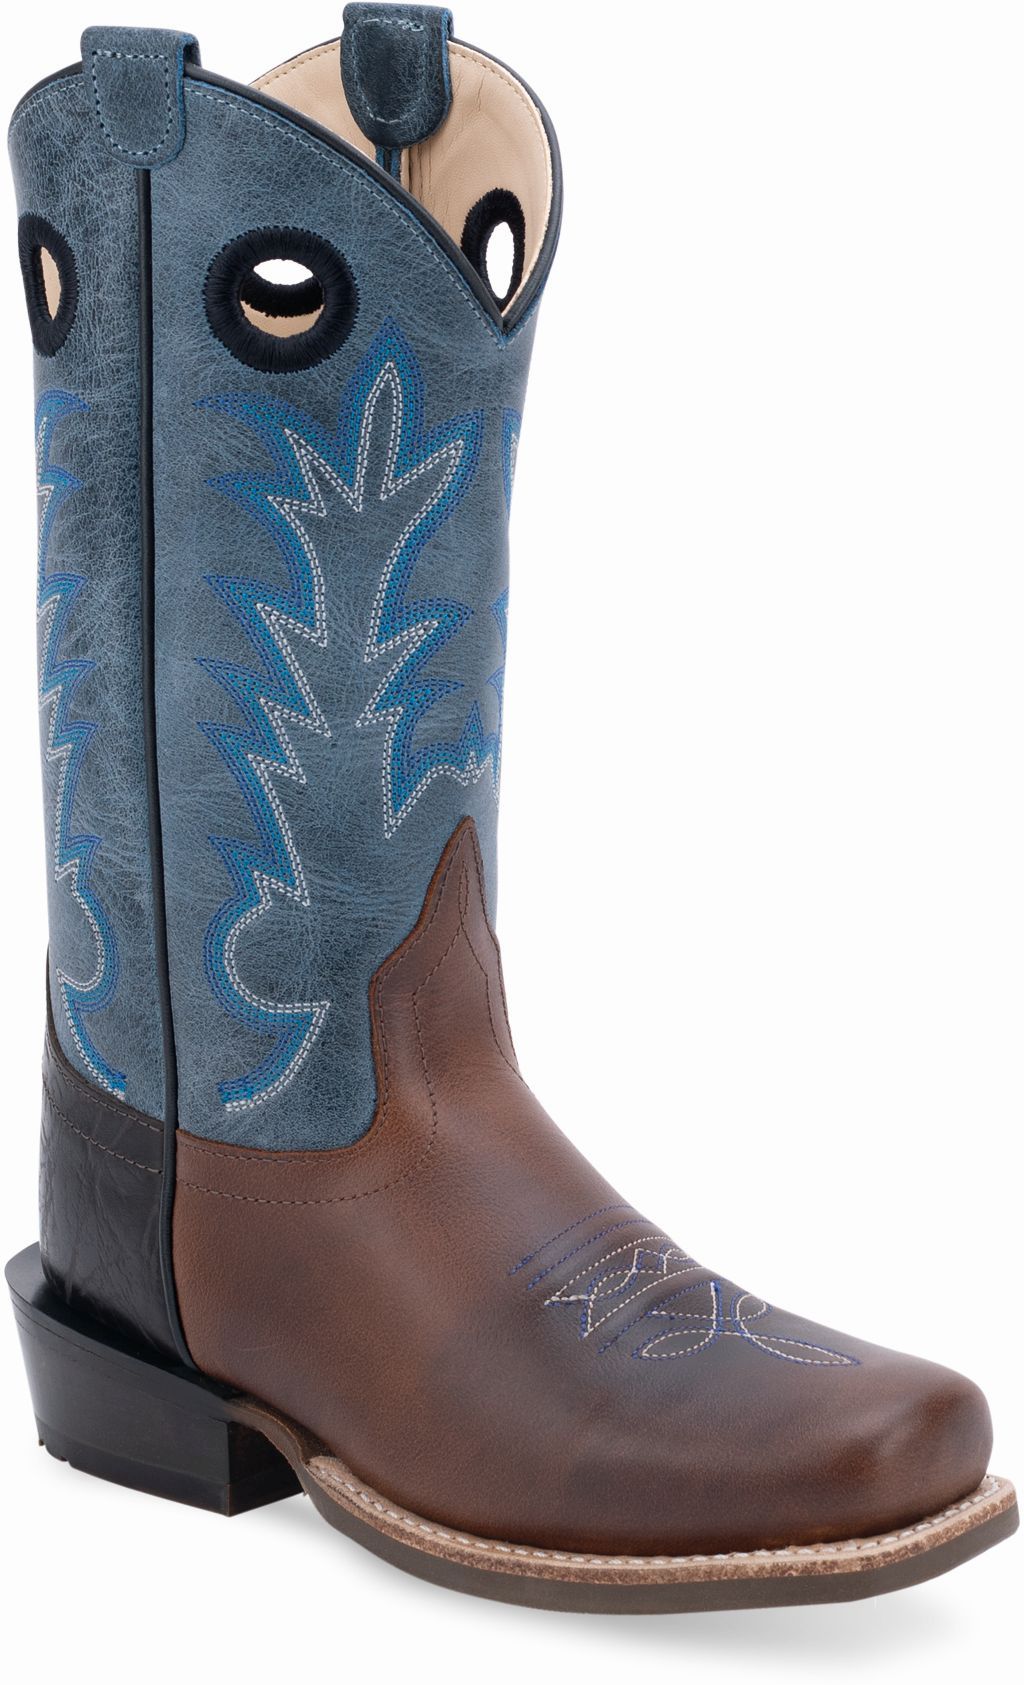 Old West Burnt Brown Foot with Printed Black Counter Milled Crunchy Blue Shaft Children's Medium Square Toe Boots